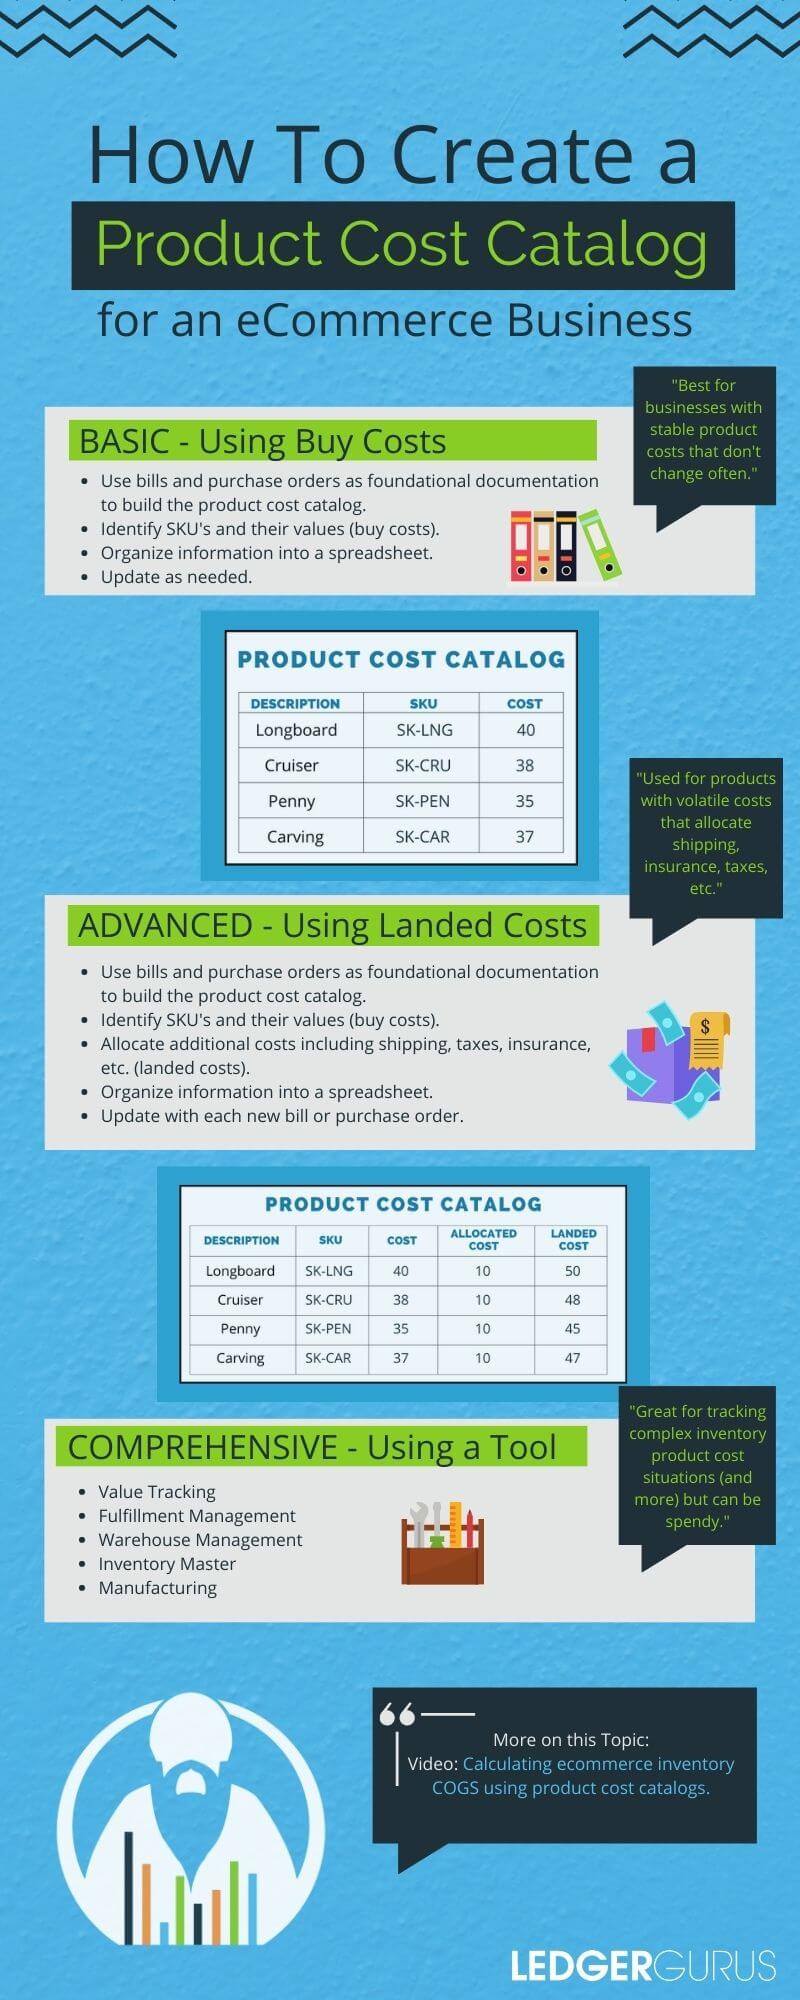 infographic for how to create a product cost catalog